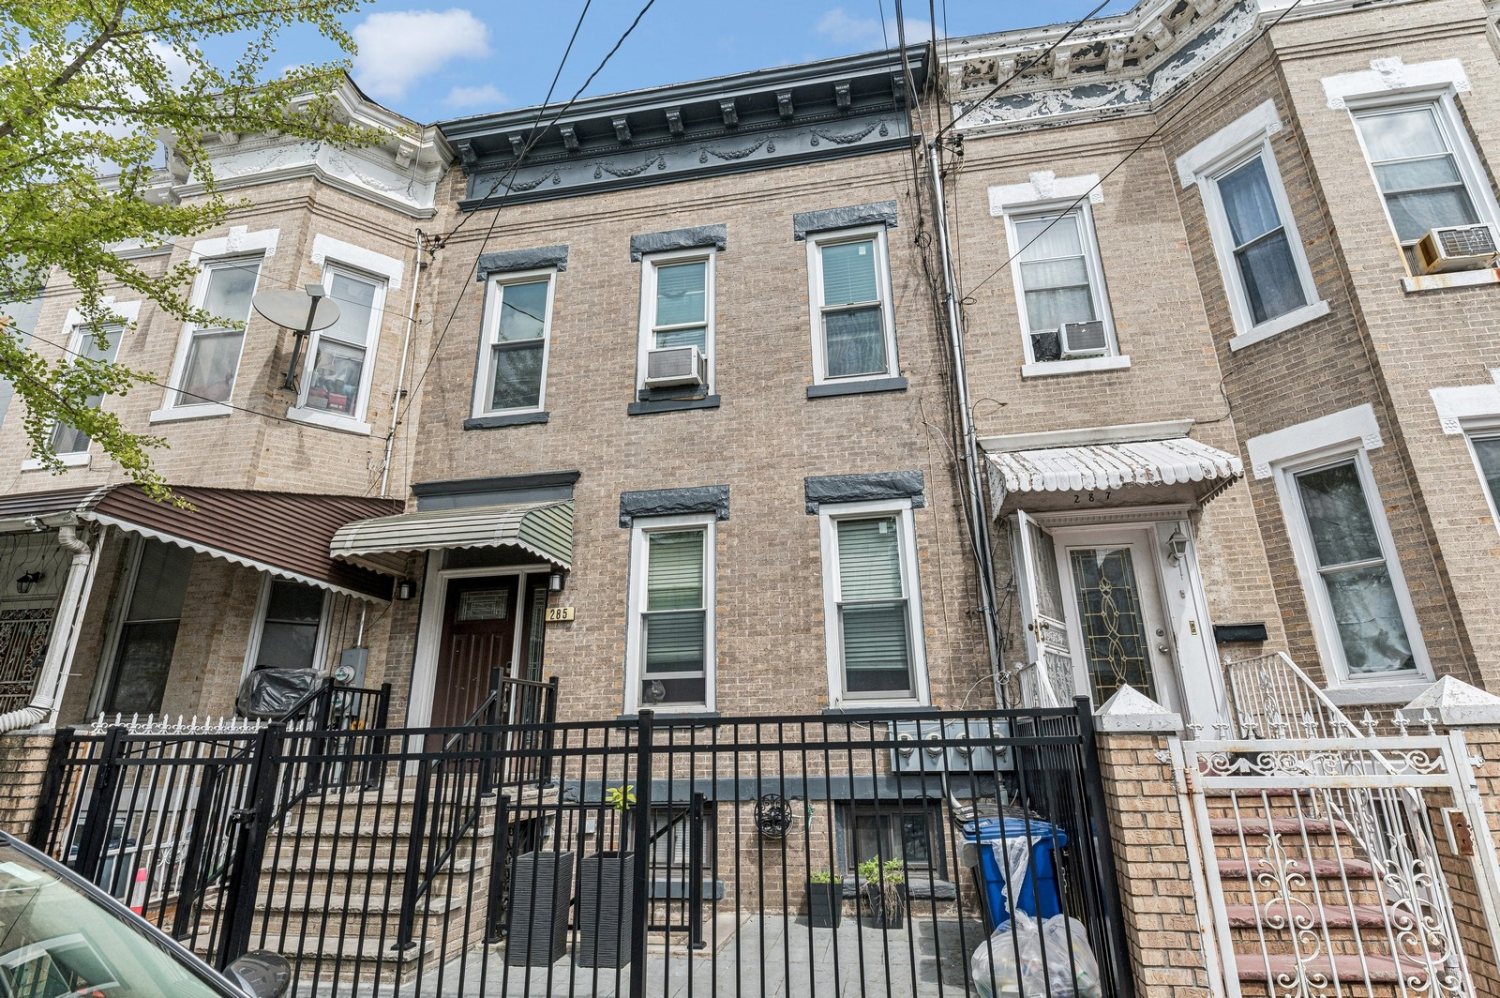 285 Lincoln Avenue, East New York, Brooklyn, New York - 4 Bedrooms  
3 Bathrooms  
10 Rooms - 